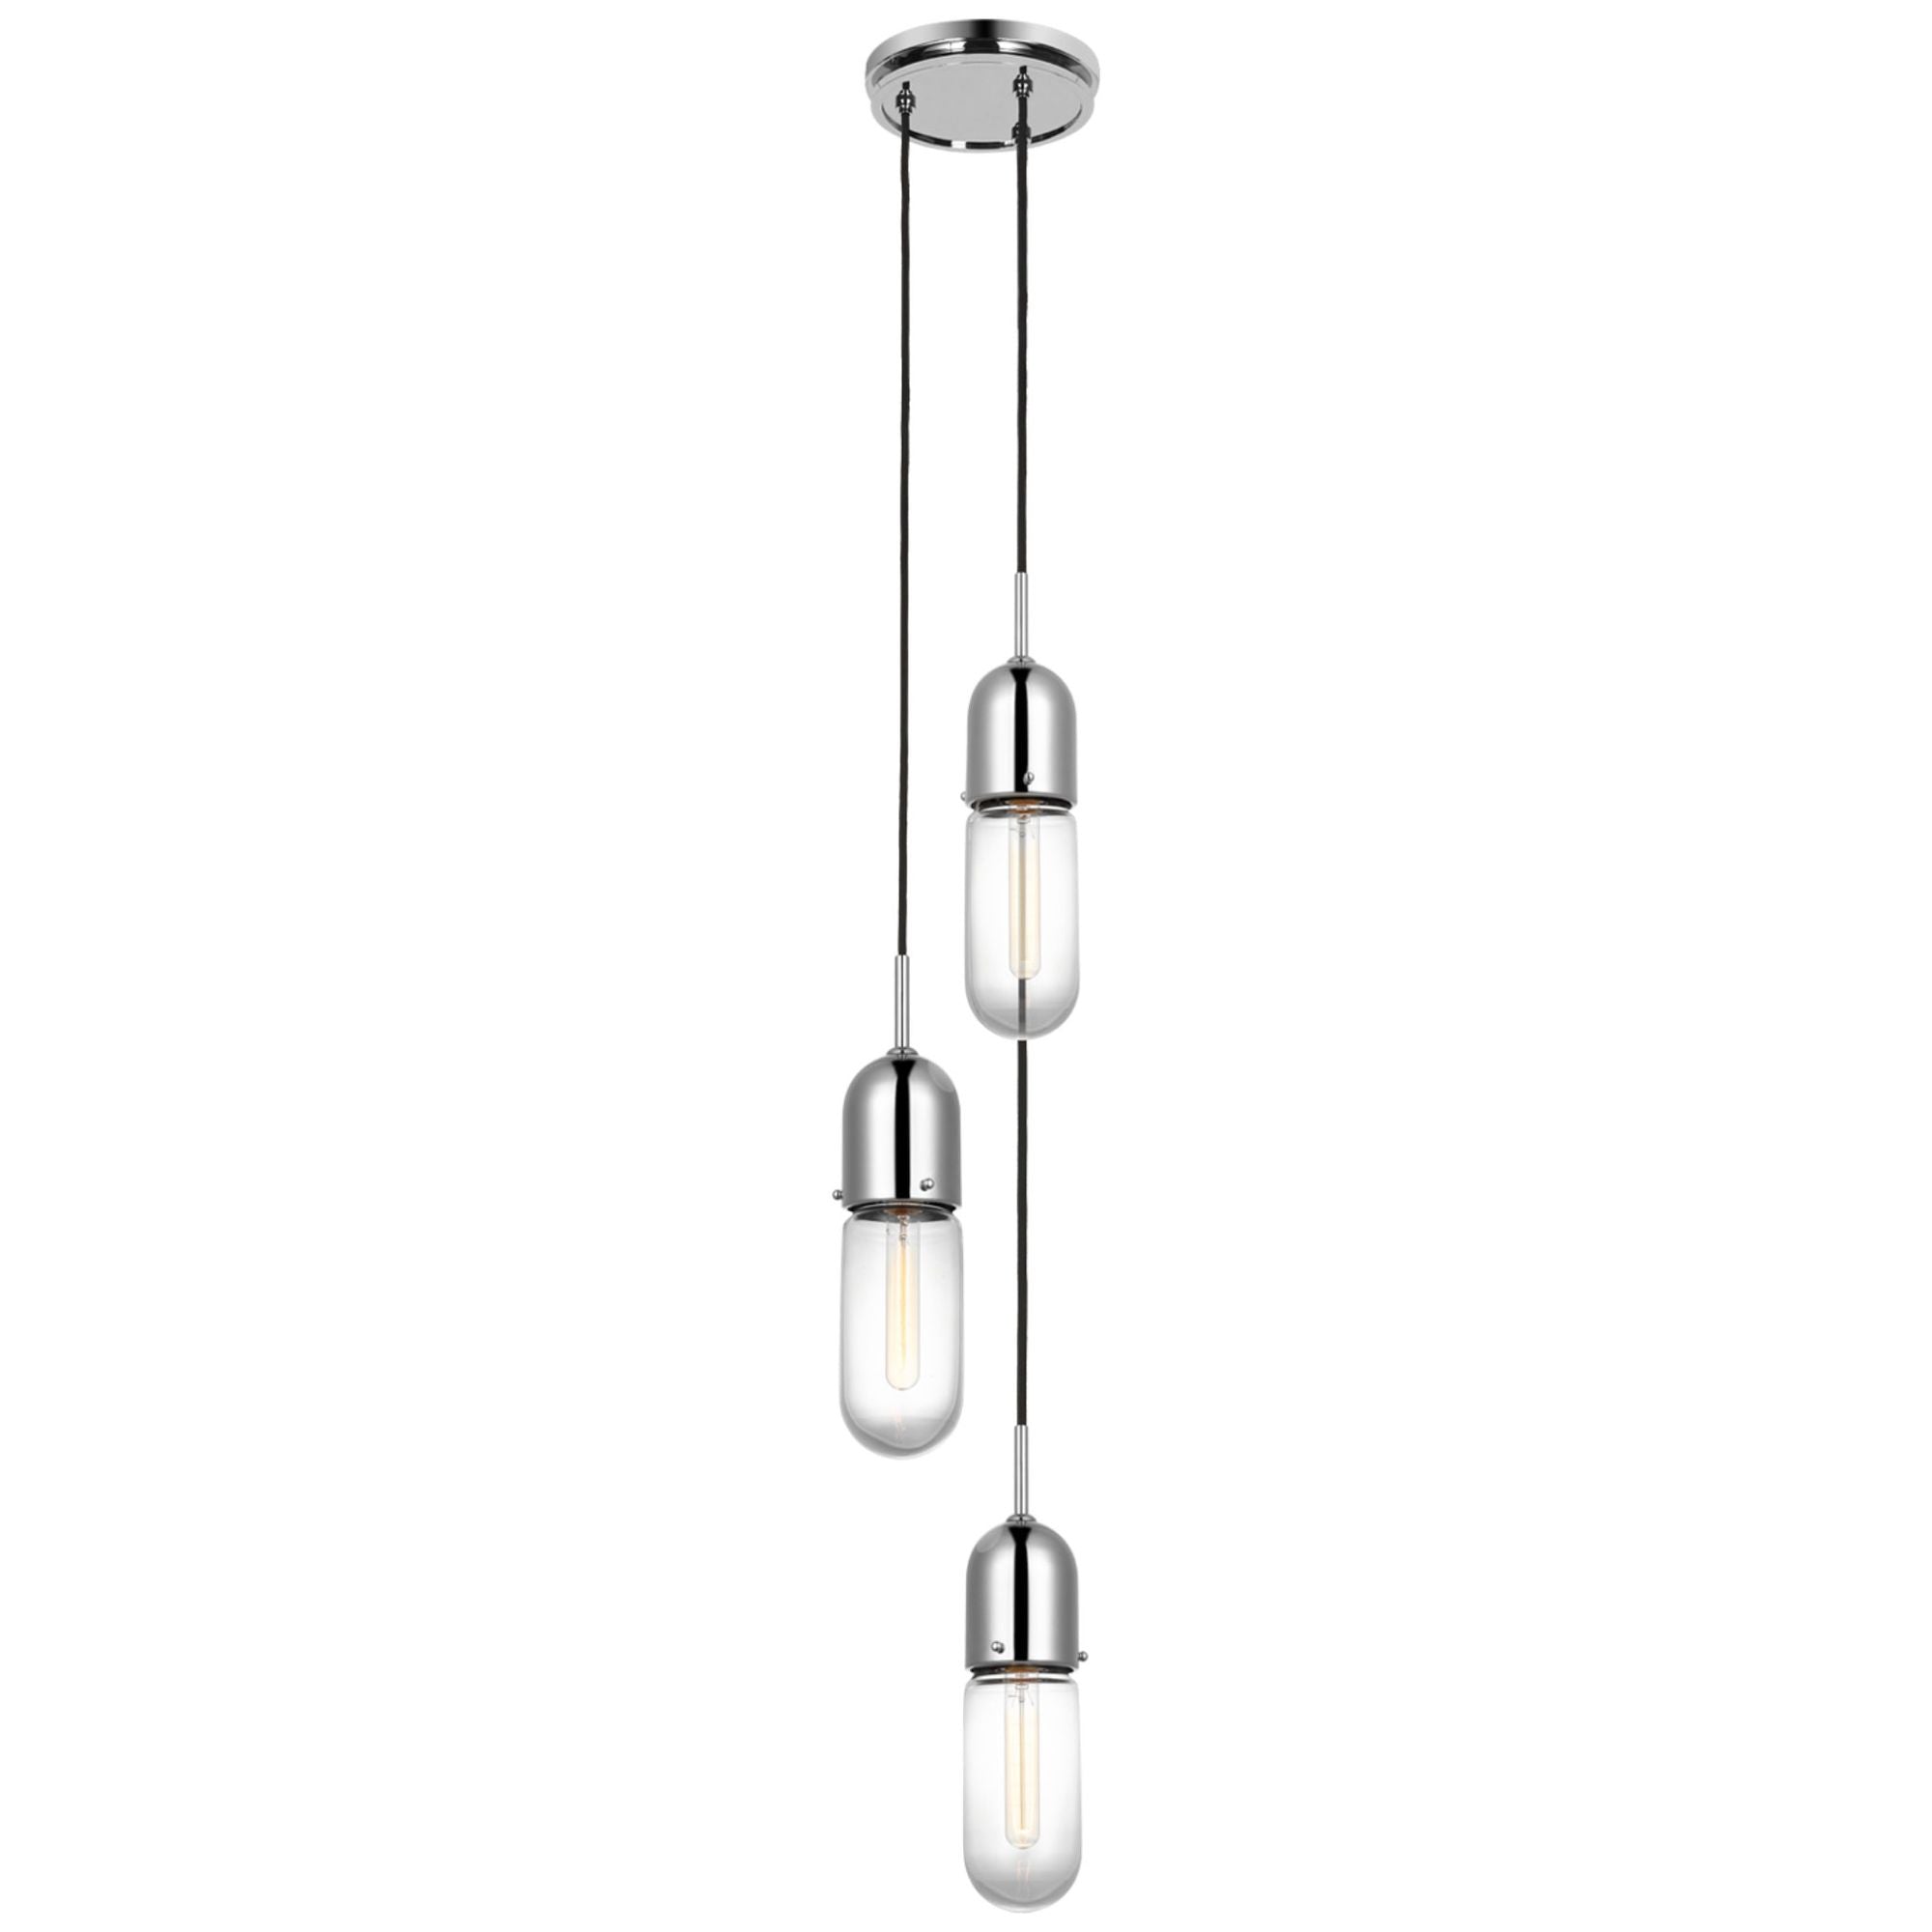 Thomas O'Brien Junio 3-Light Pendant in Polished Nickel with Clear Glass